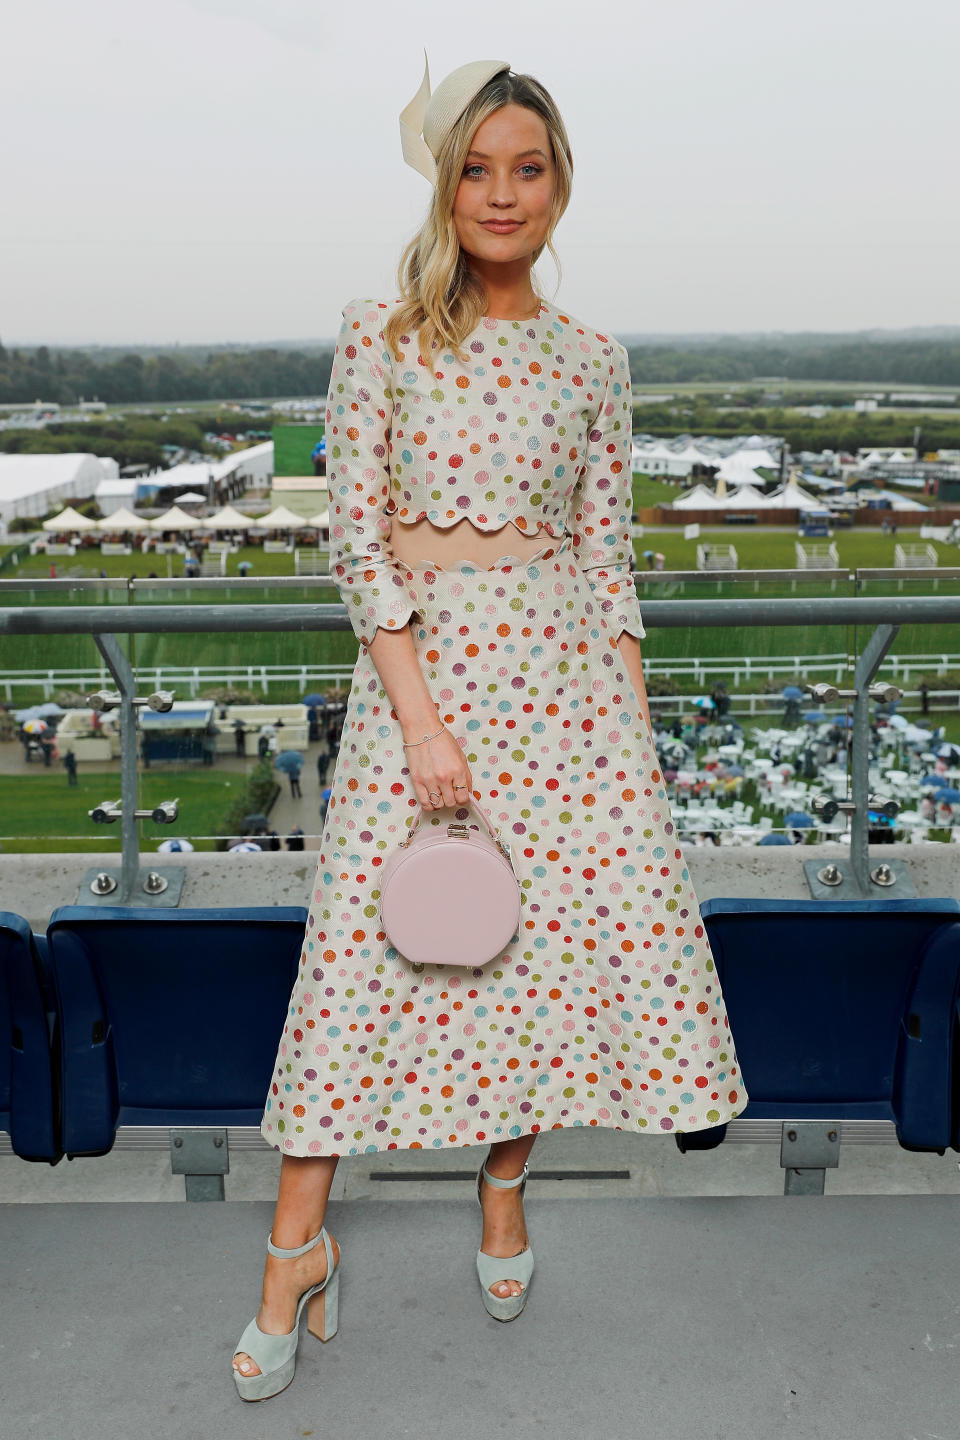 TV presenter Laura Whitmore wears a polka dot dress by London Fashion Week label Tata Naka with an Aspinal of London bag, Gina shoes and a Philip Treacy hat. <em>[Photo: Getty]</em>